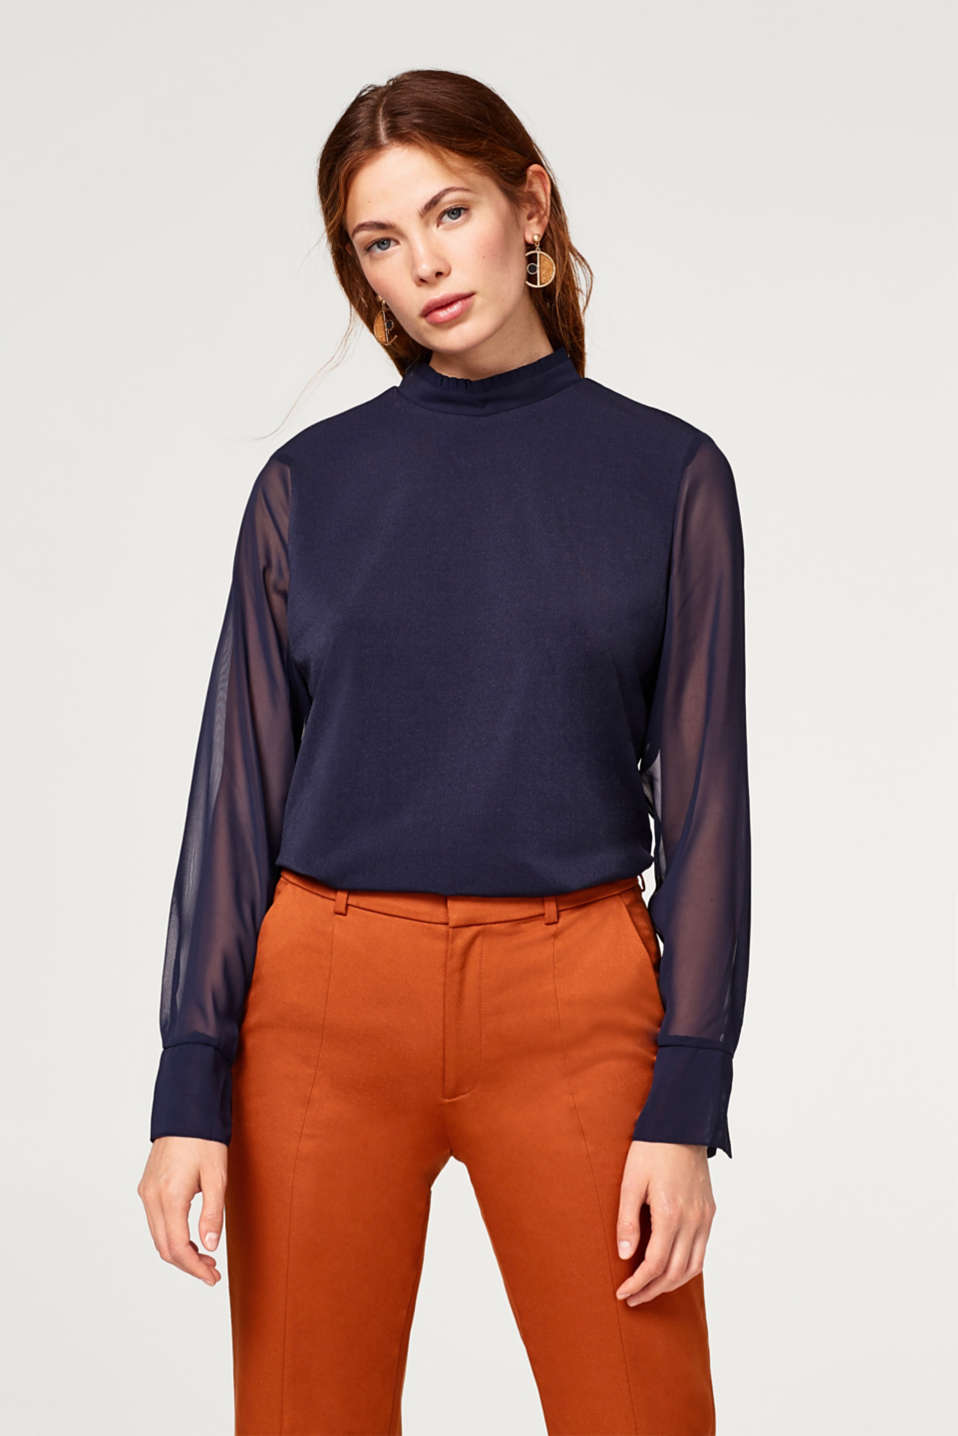 Esprit - Blouse style top with chiffon sleeves at our Online Shop